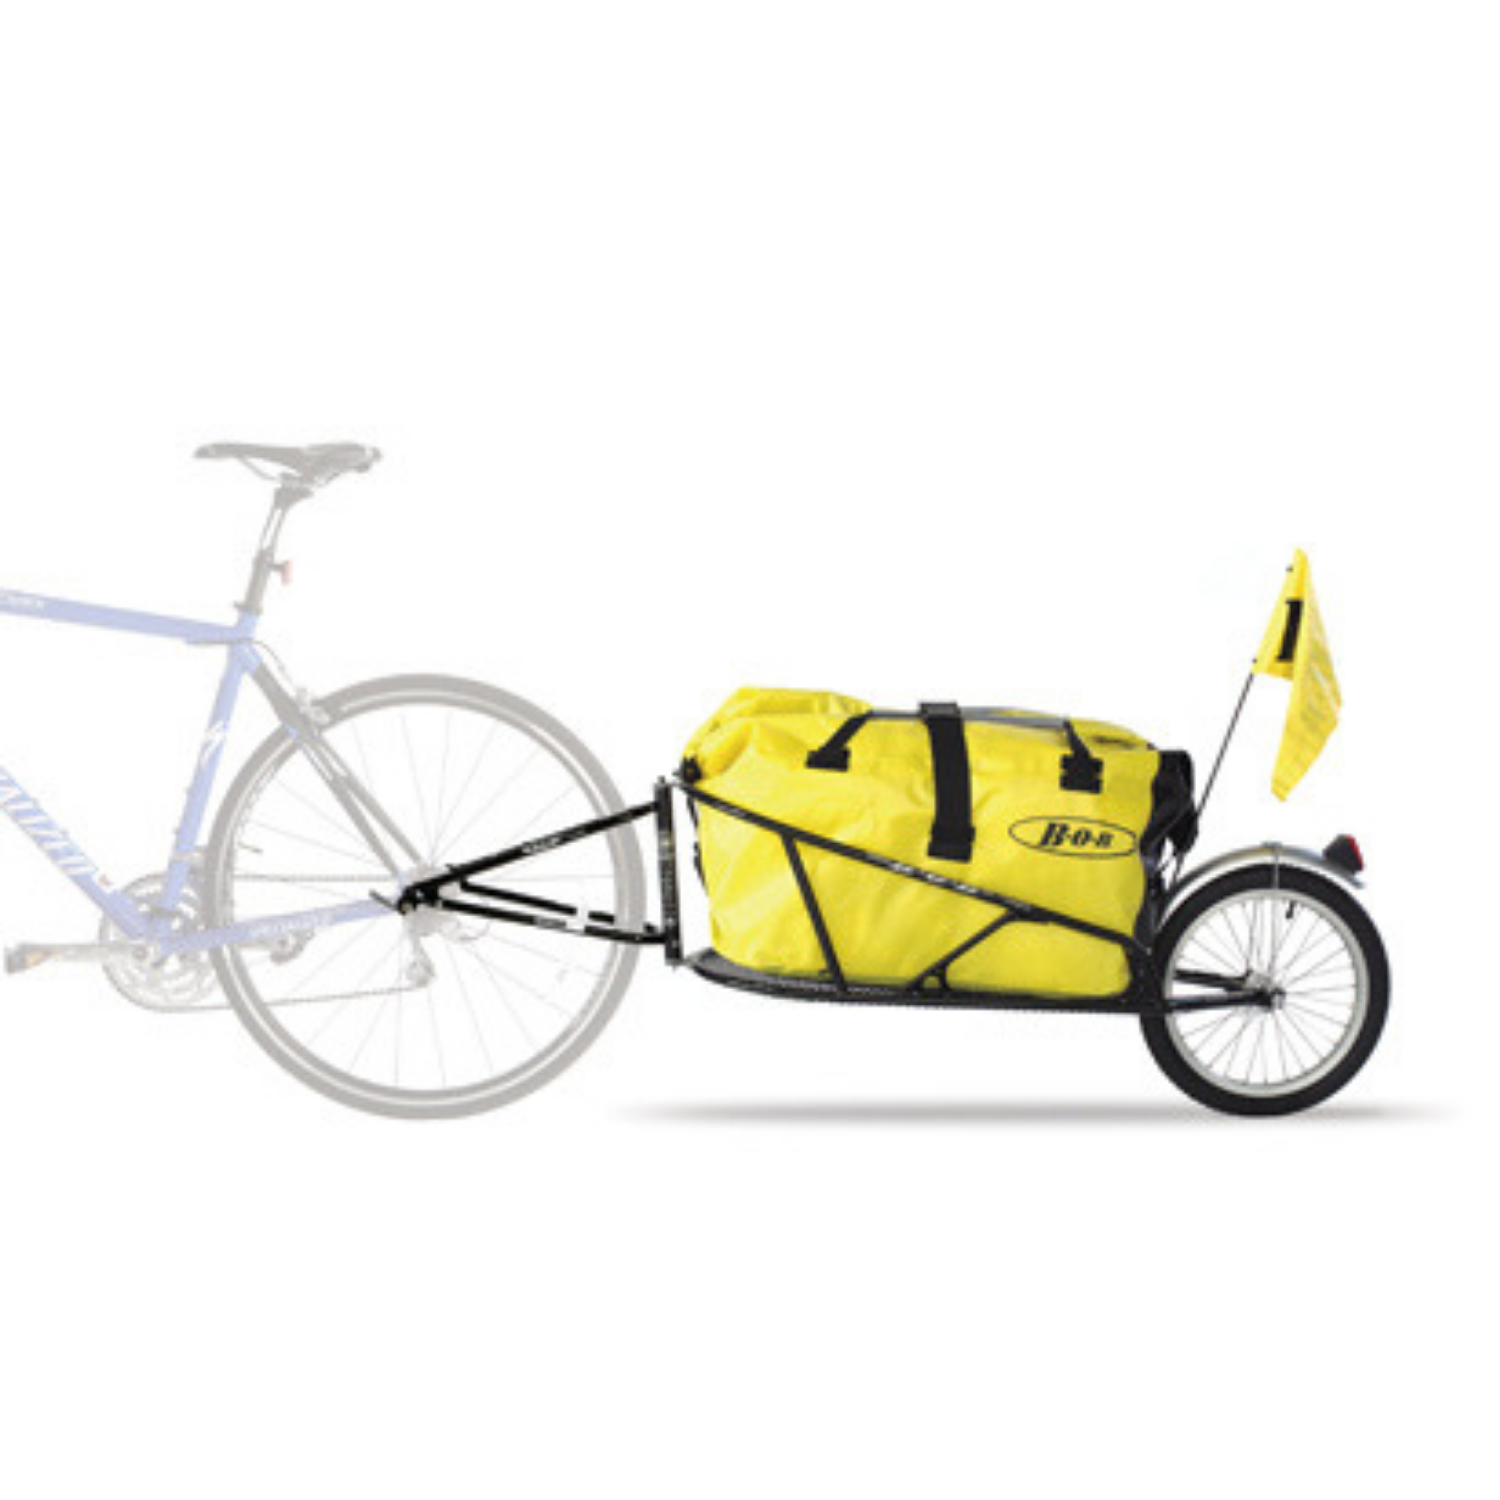 Yak Bike Trailer attached to a bicycle